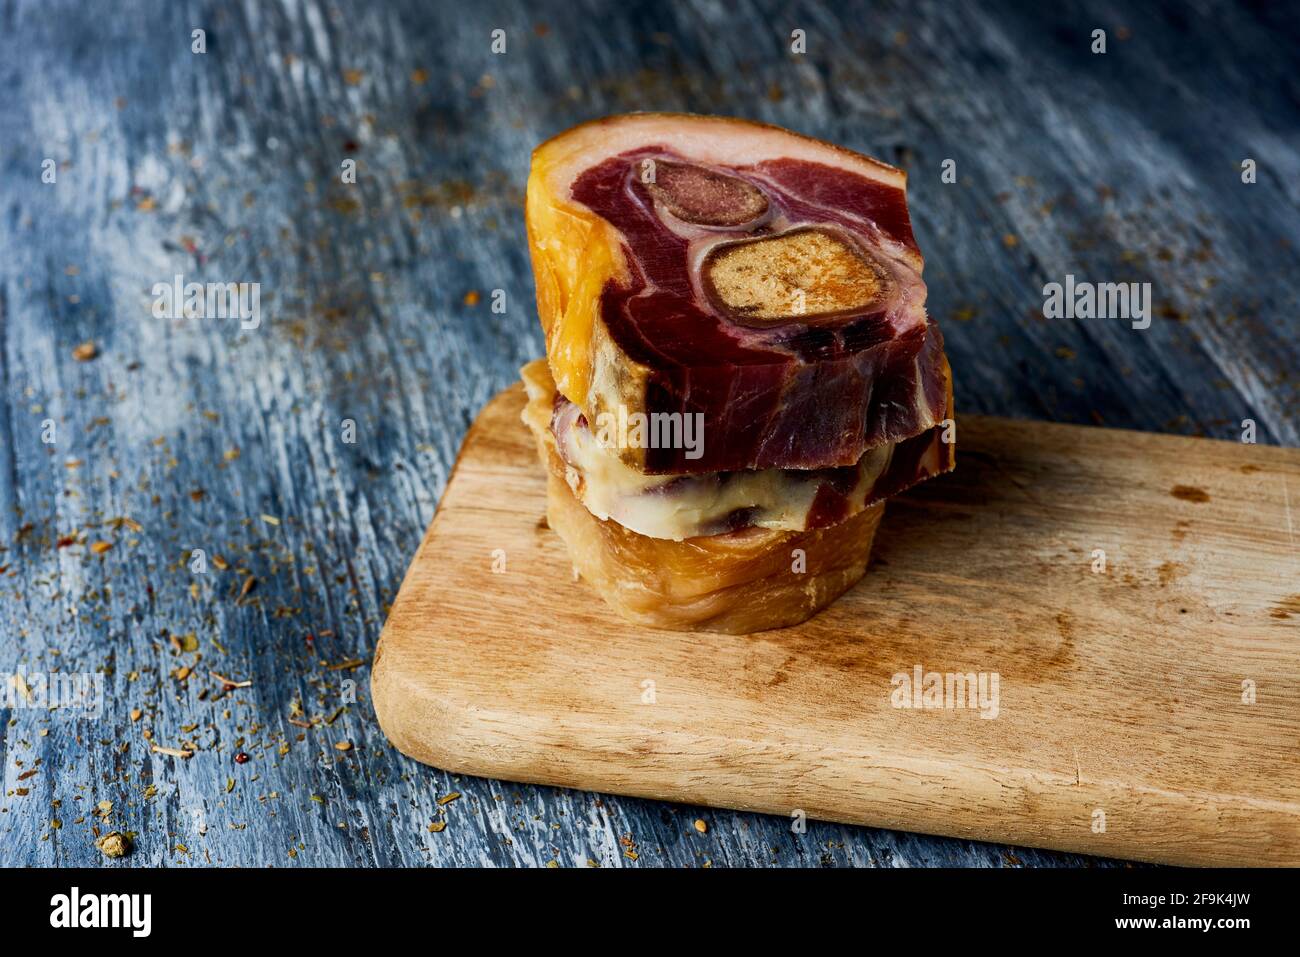 some cuts of codillo de jamon, spanish ham hock, on a chopping board placed on a gray rustic wooden table Stock Photo